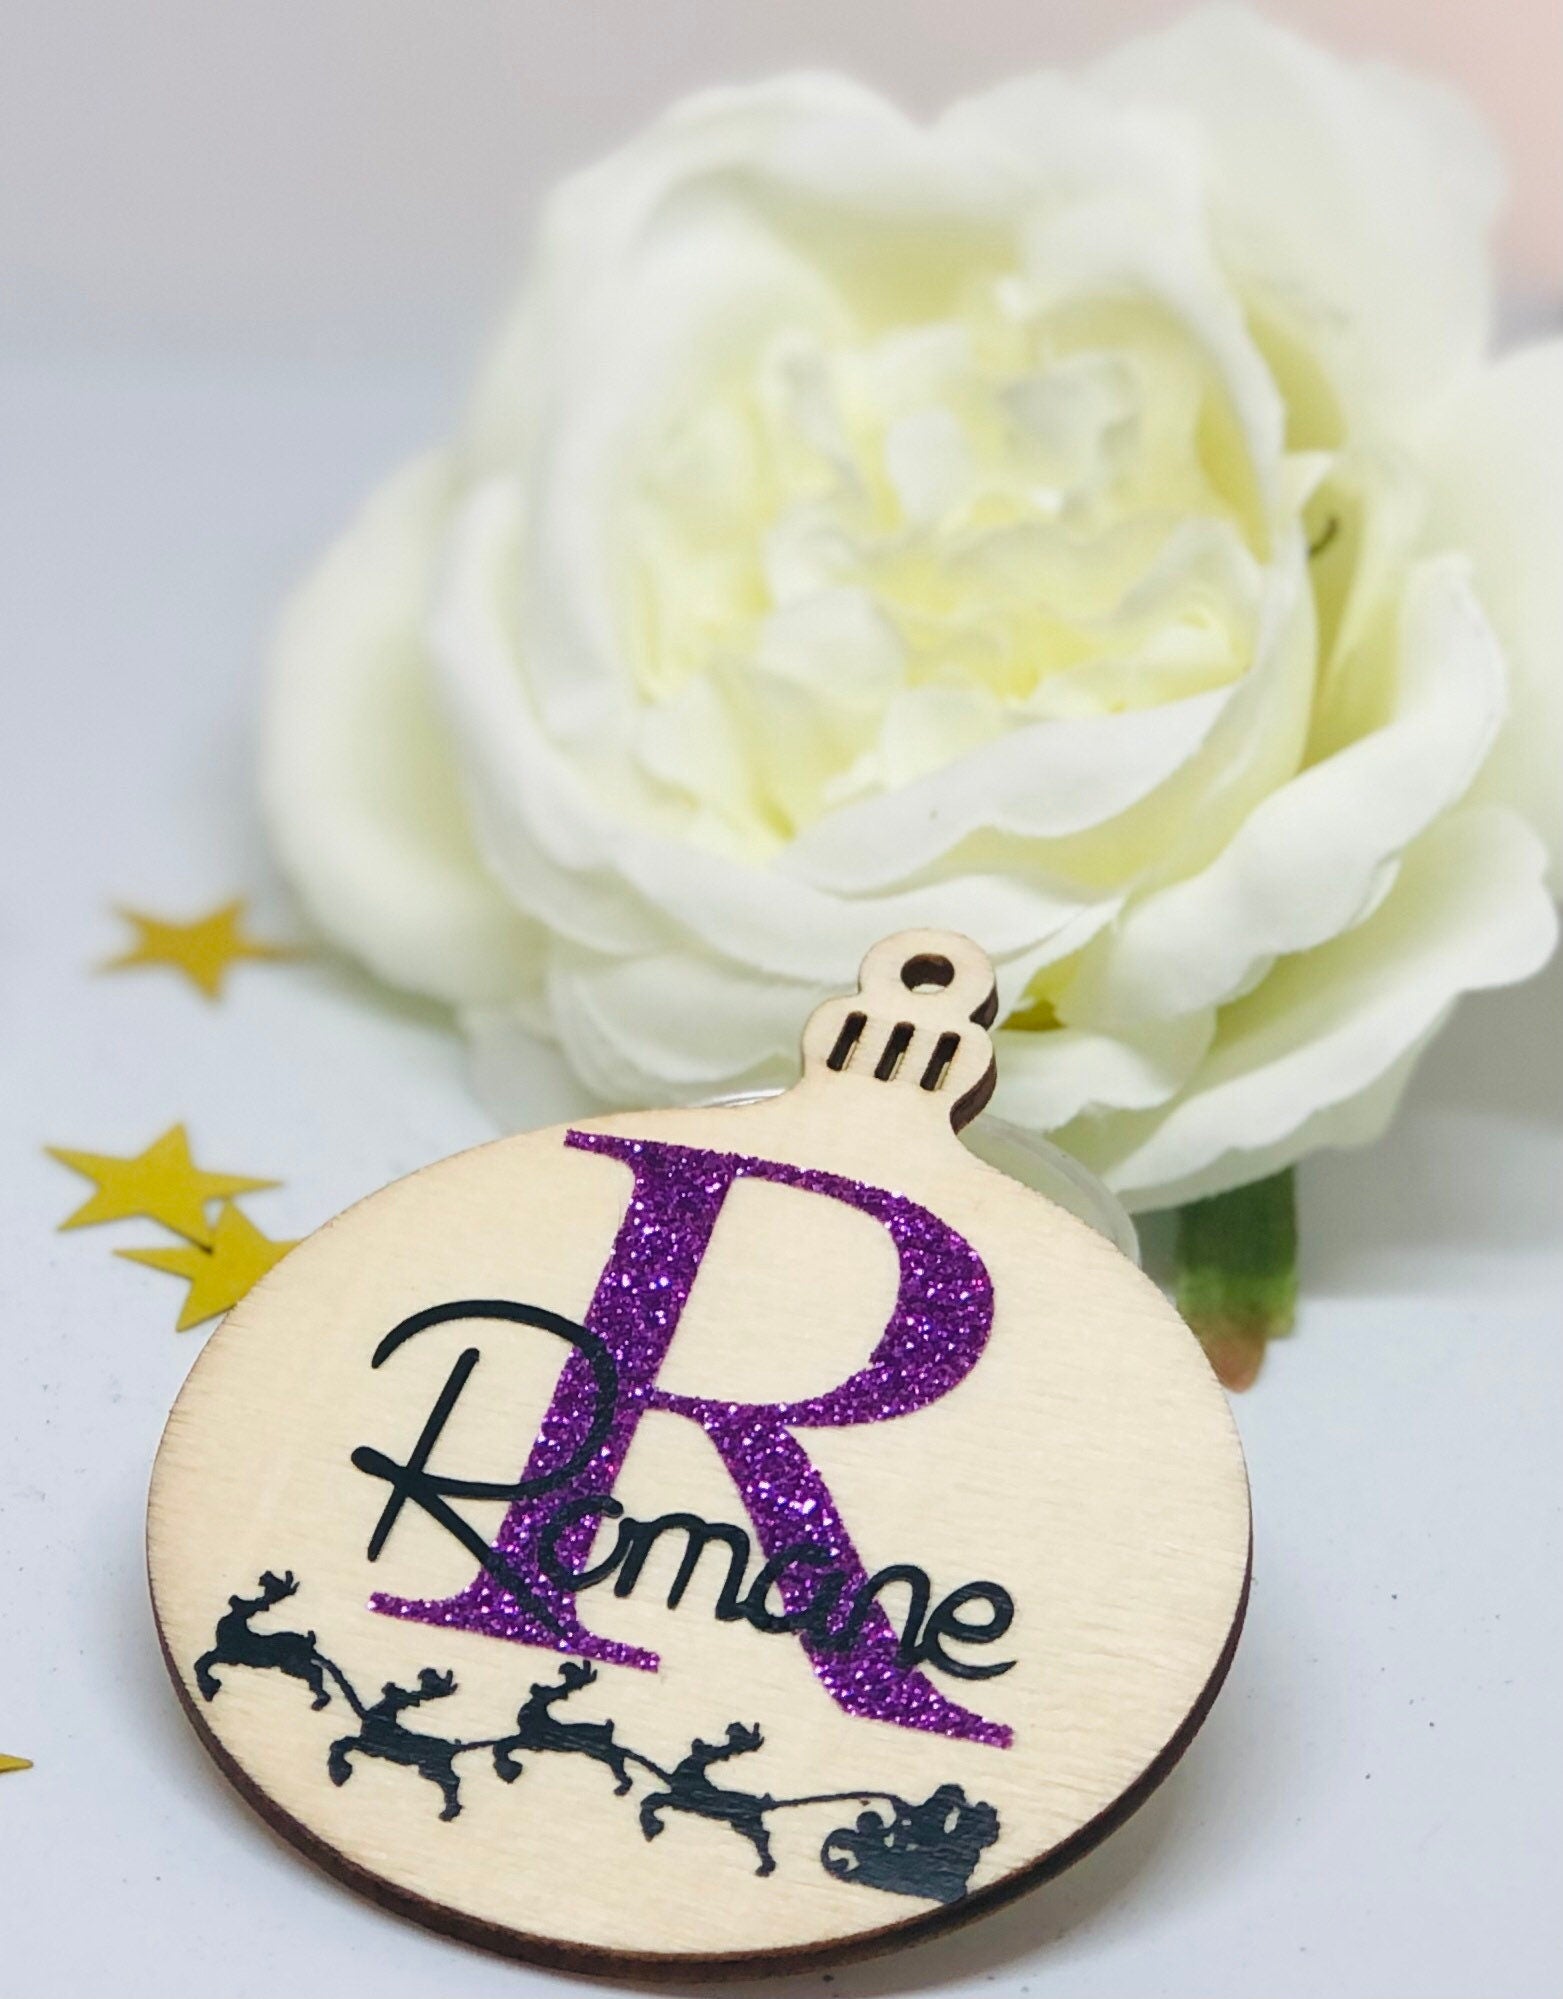 Personalized Wooden Flat Ball to Decorate Your Christmas Tree